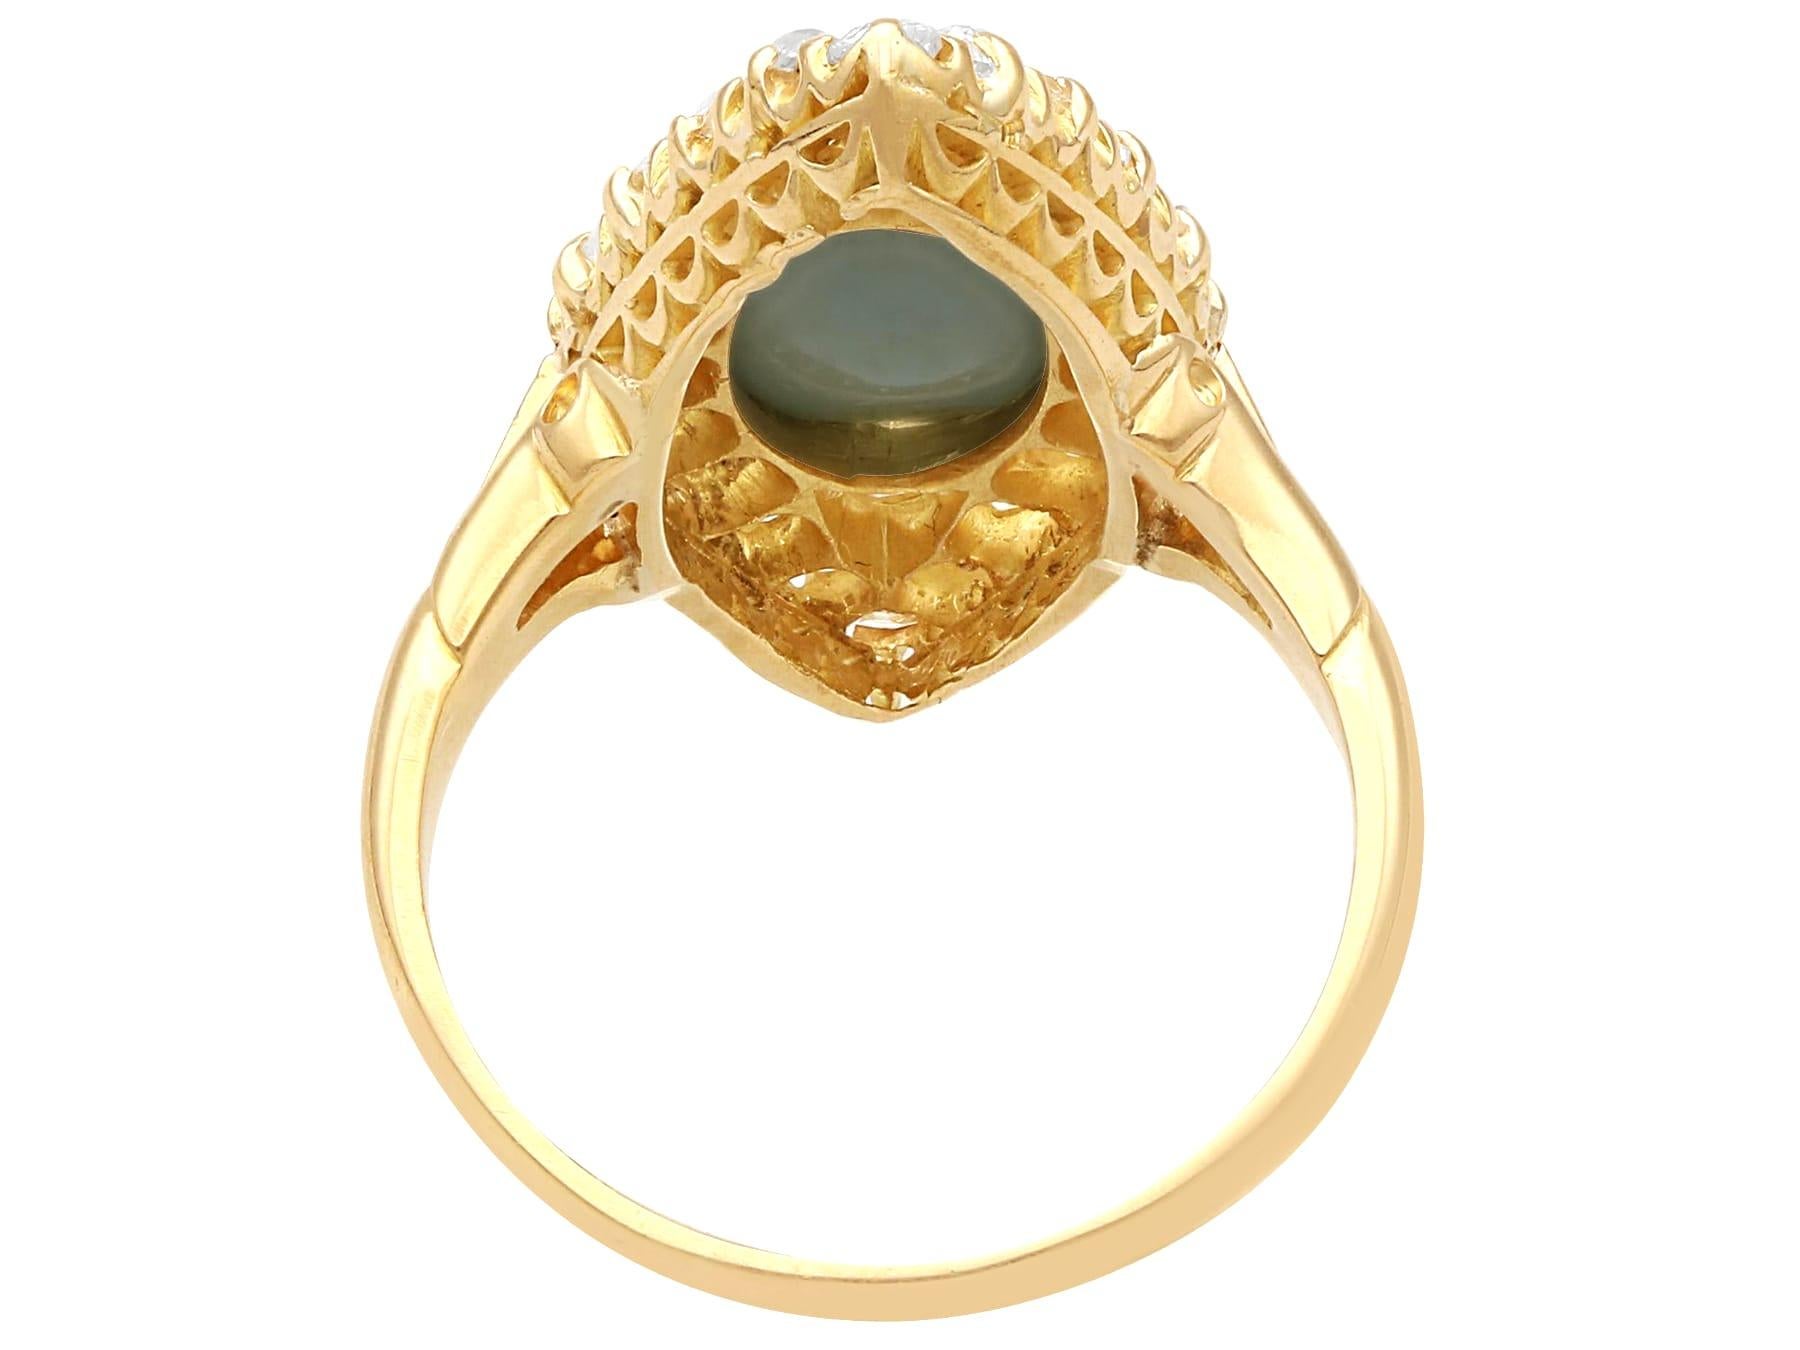 Antique 2.65 Ct Cat's Eye Chrysoberyl and 1.18 Ct Diamond Yellow Gold Dress Ring In Excellent Condition For Sale In Jesmond, Newcastle Upon Tyne